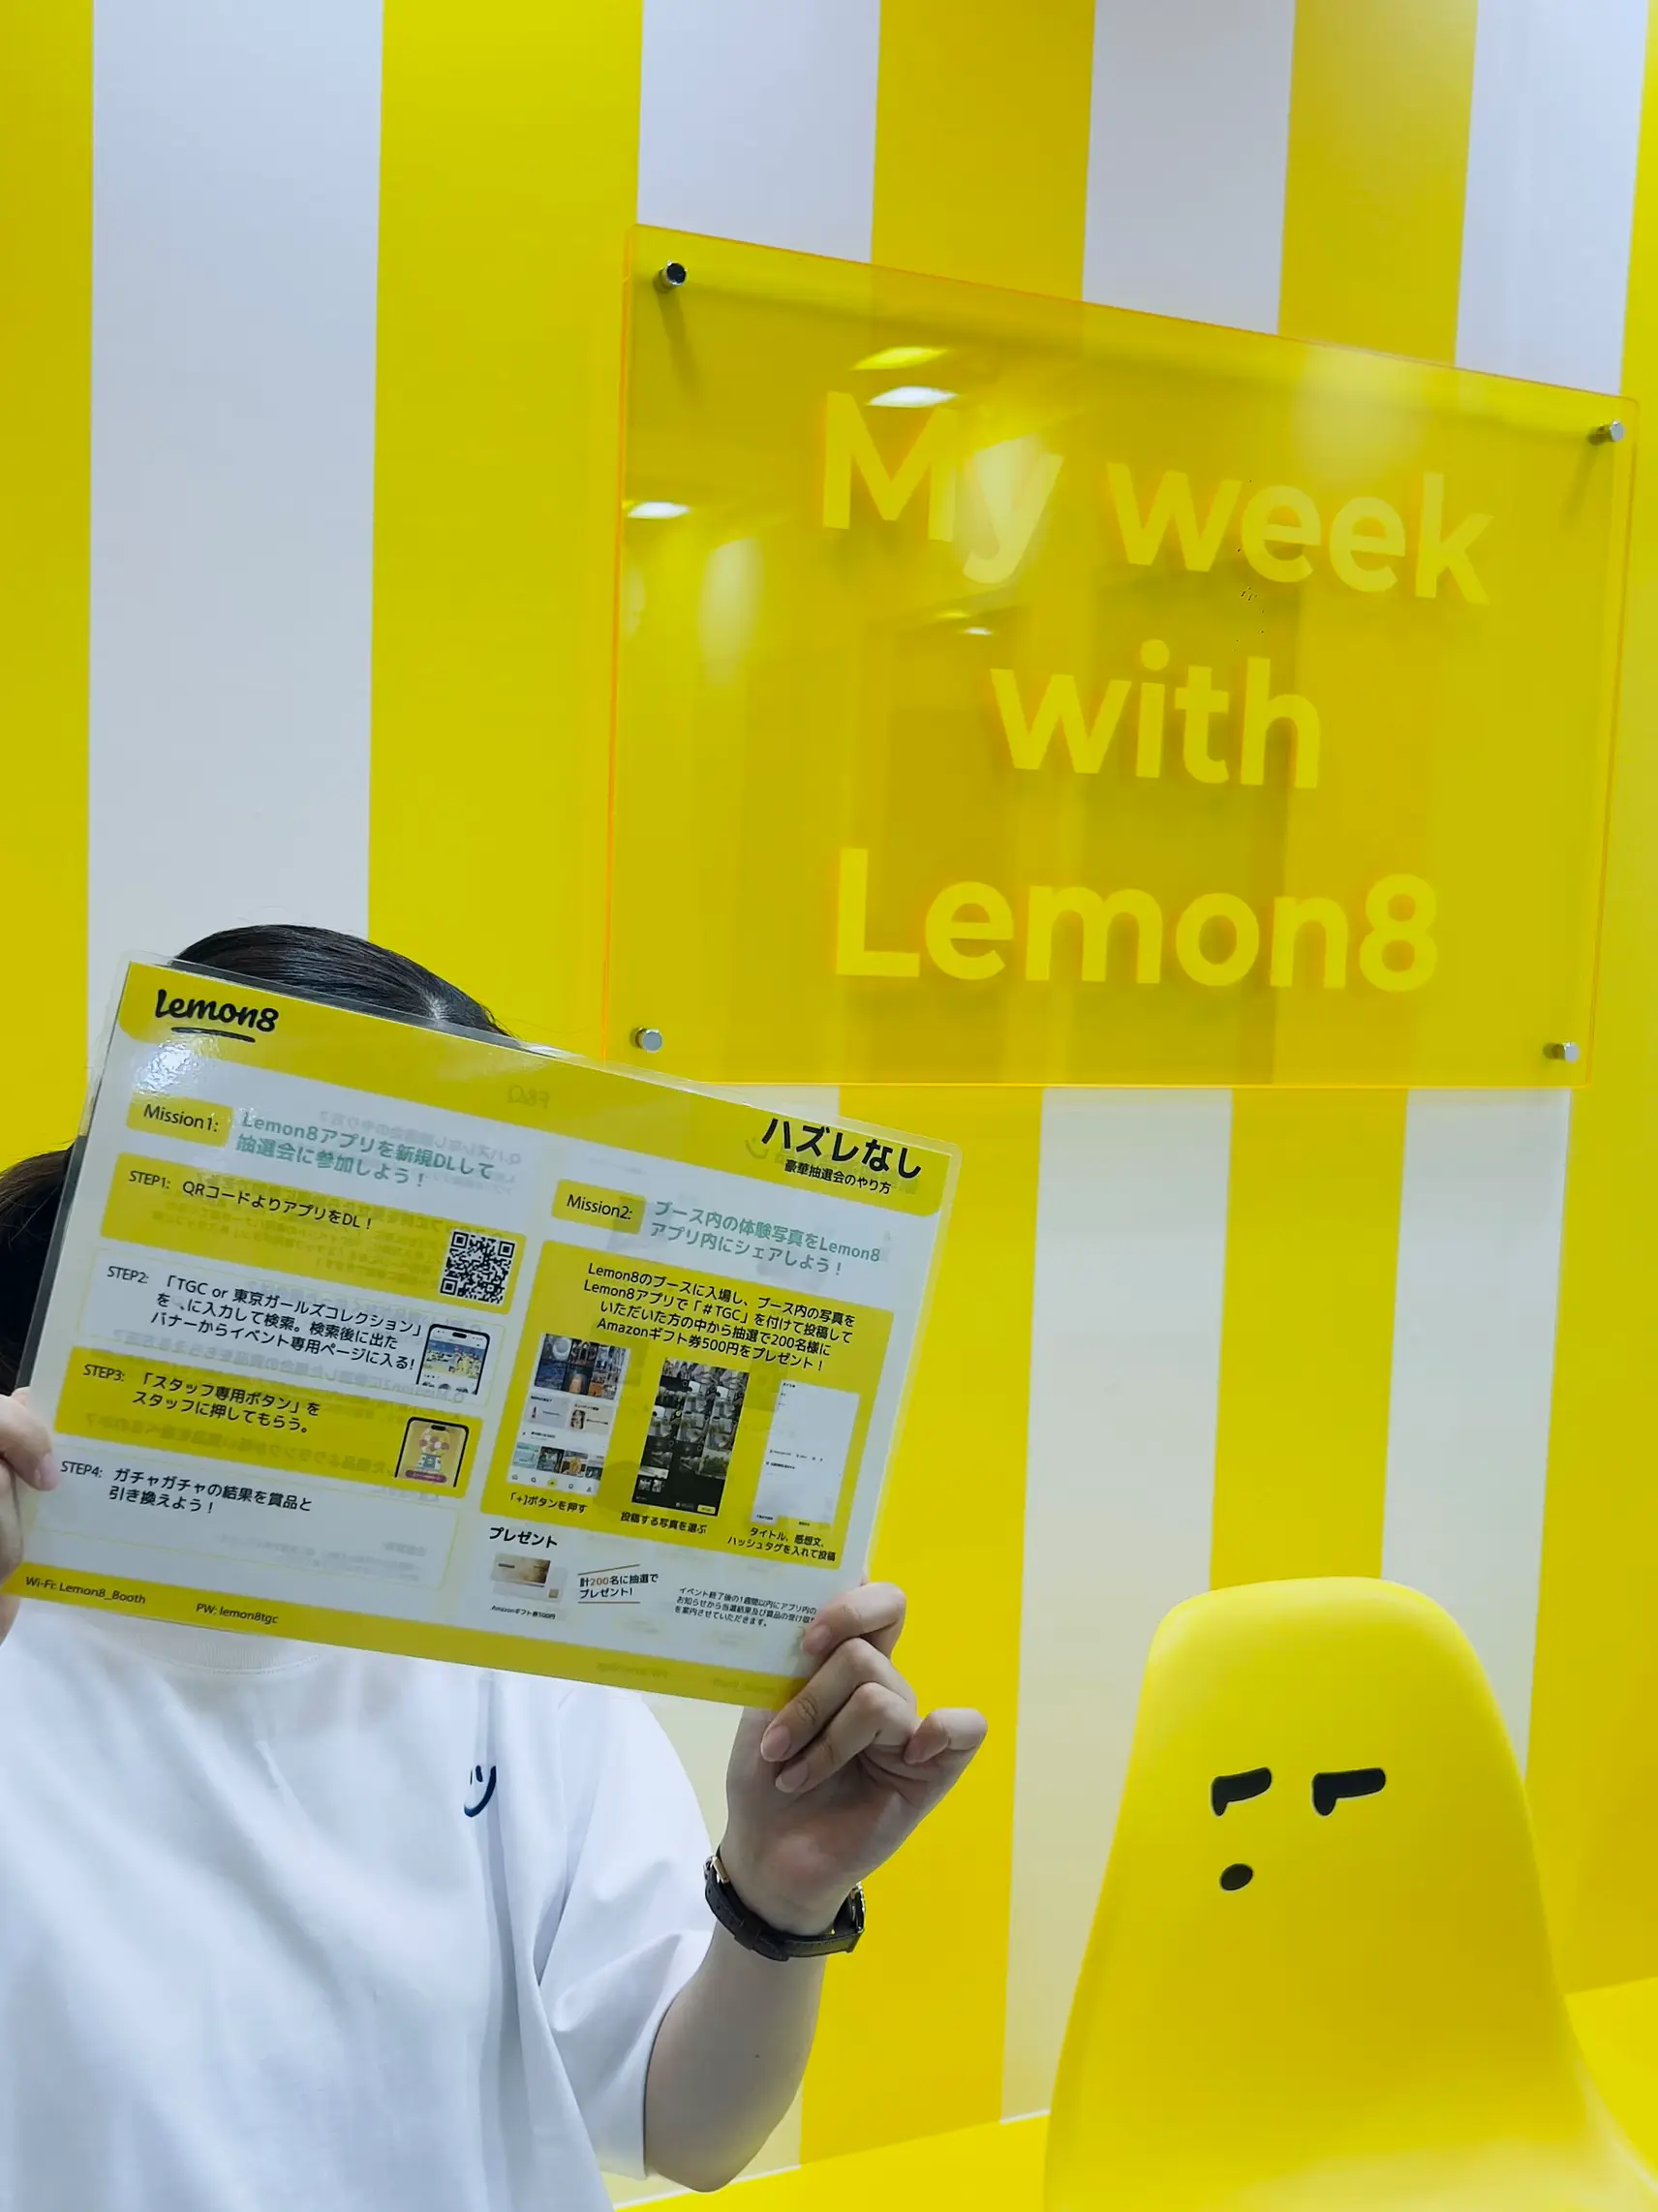 Contests and Giveaways - Lemon8検索